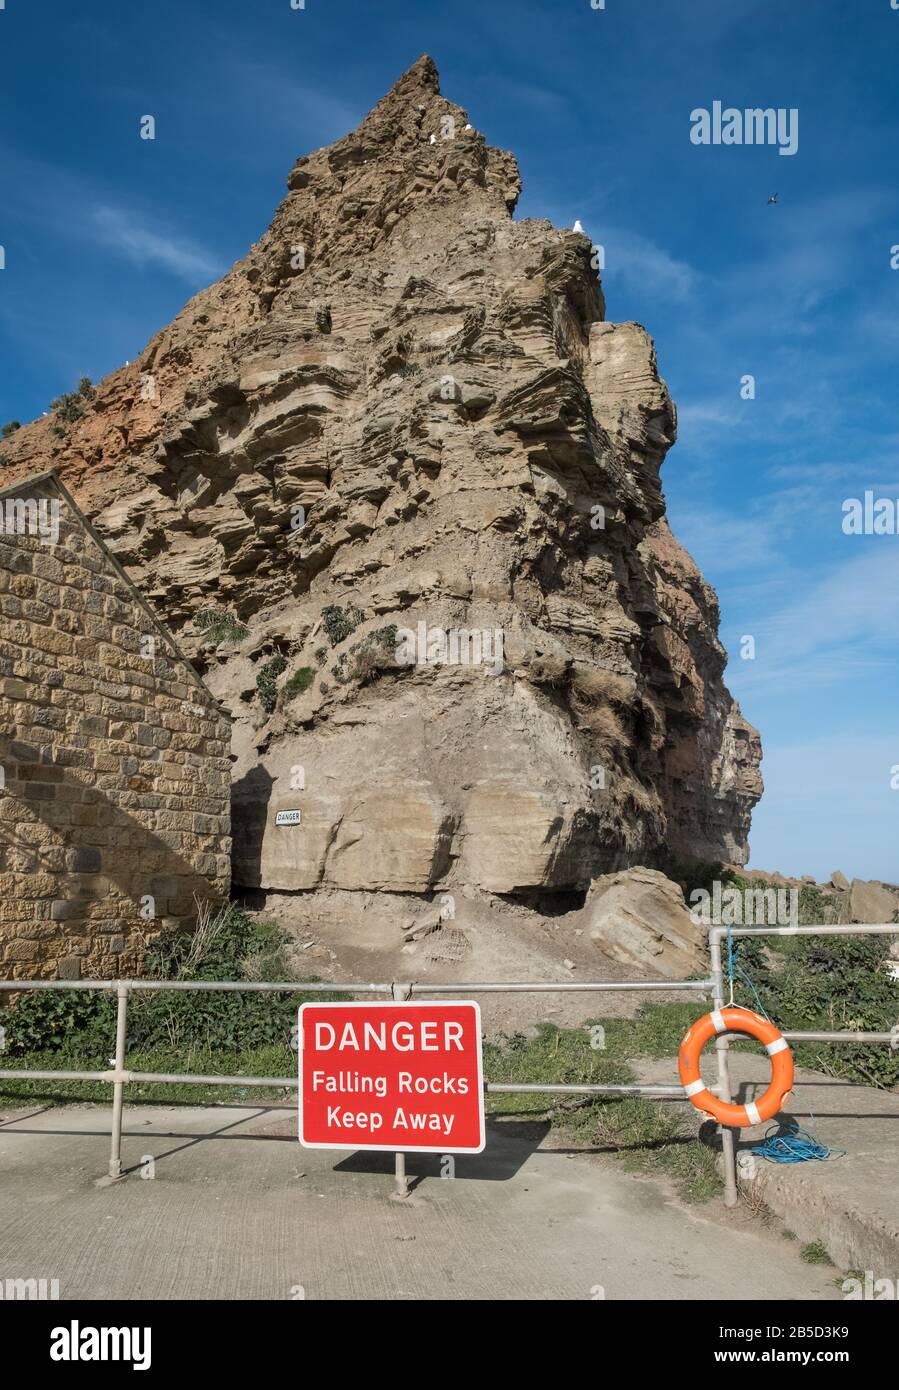 Danger sign for falling rocks, Staithes, North Yorkshire, UK Stock Photo